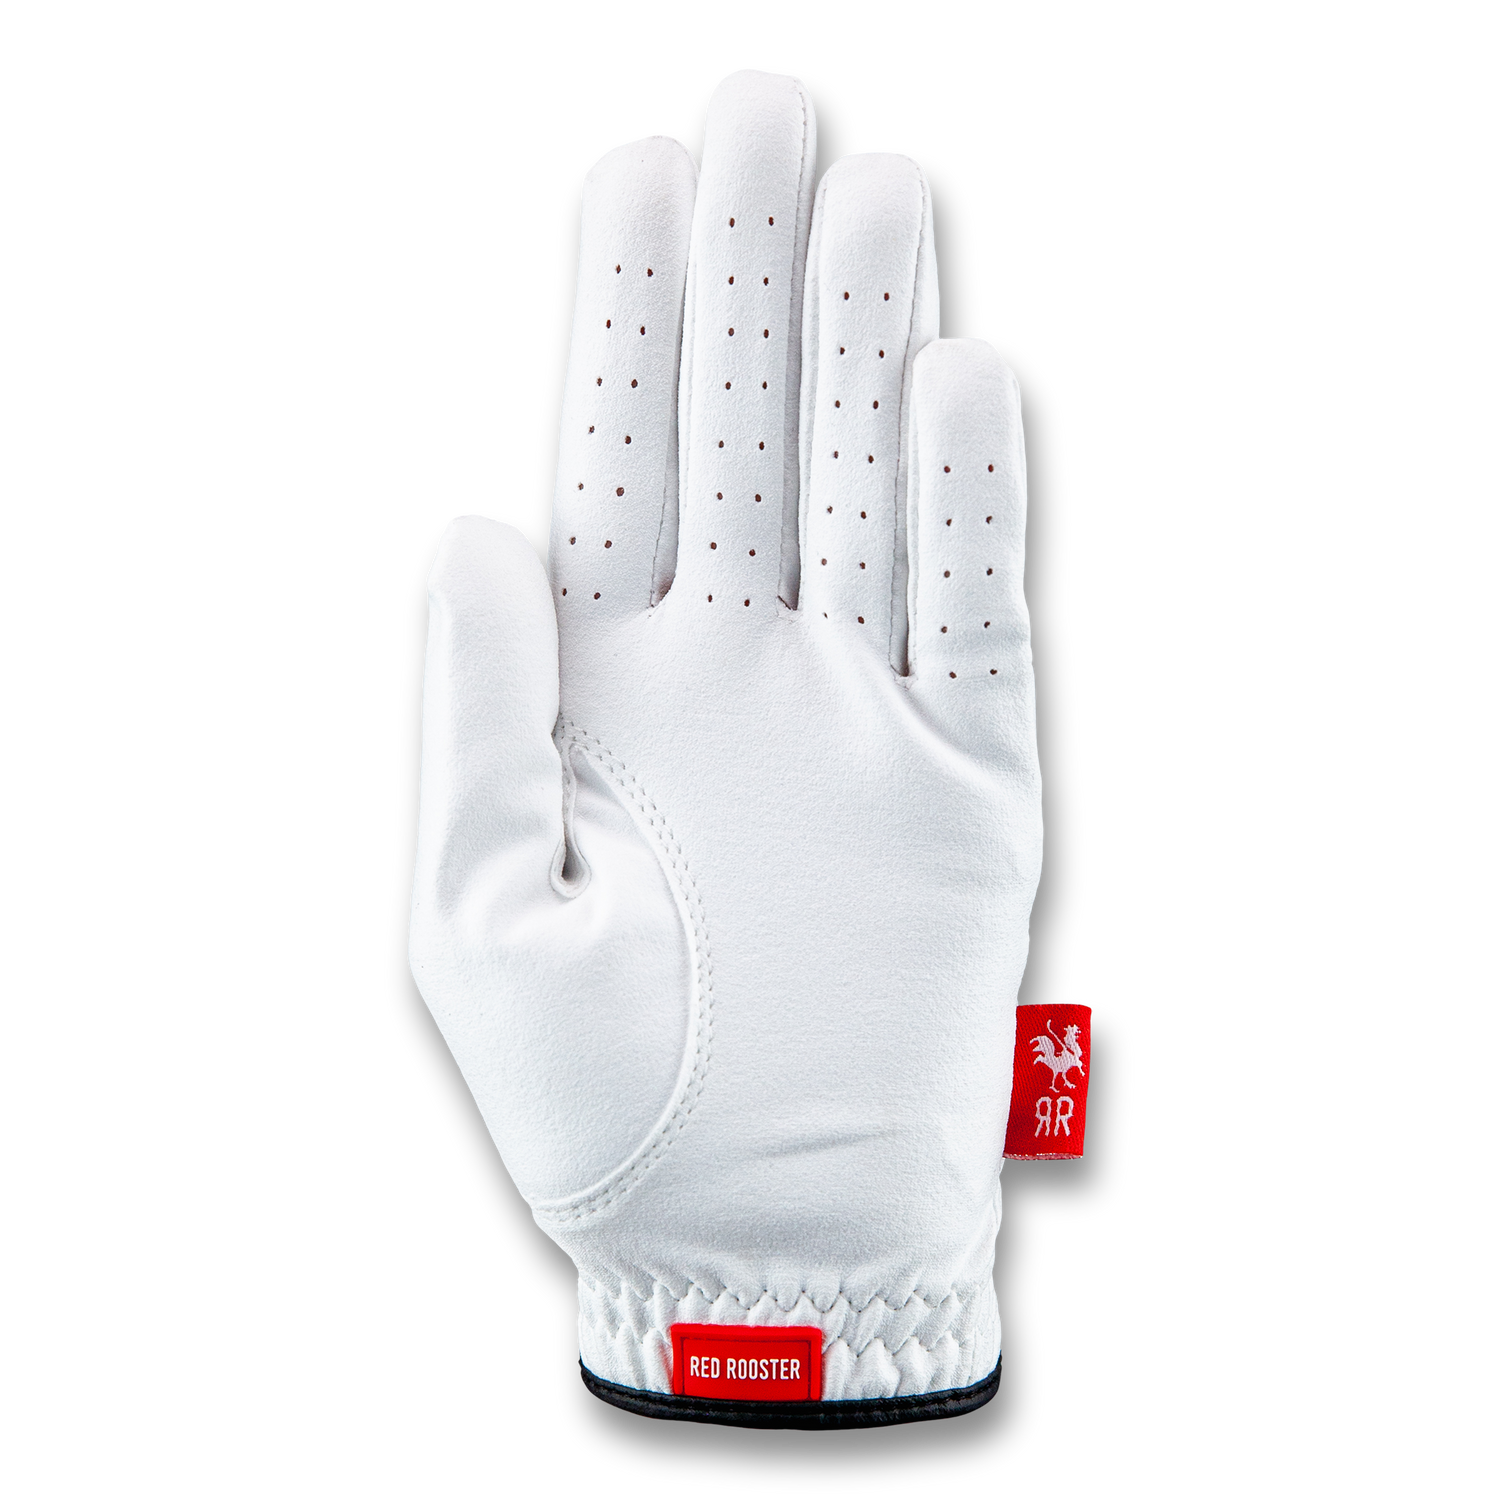 The Rook golf glove inner view